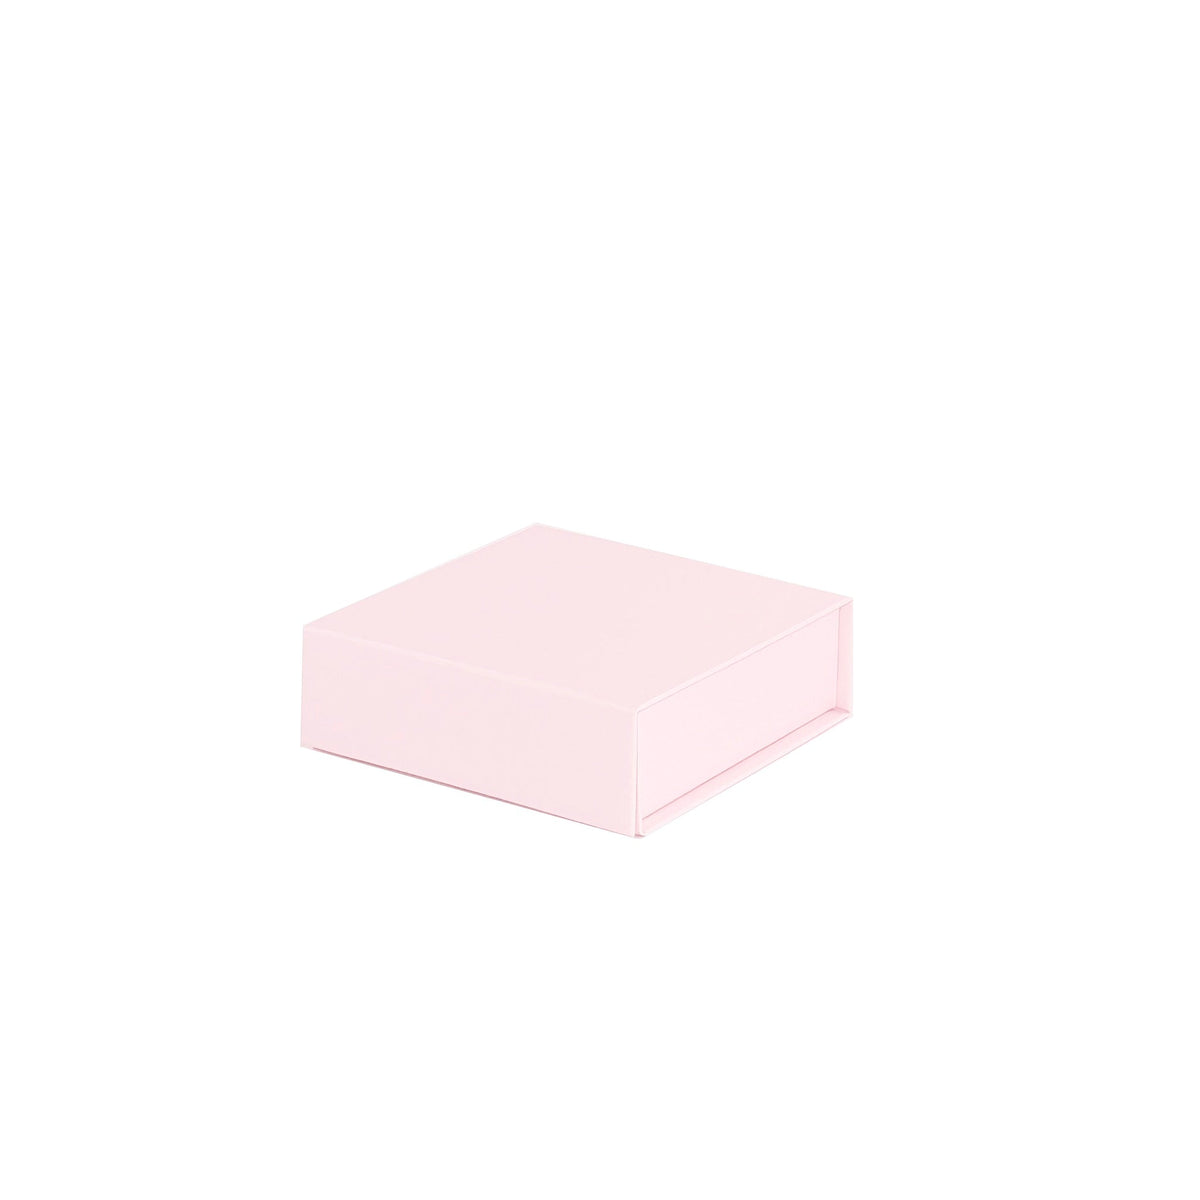 Sample - Powder Pink Small Square Magnetic Gift Boxes